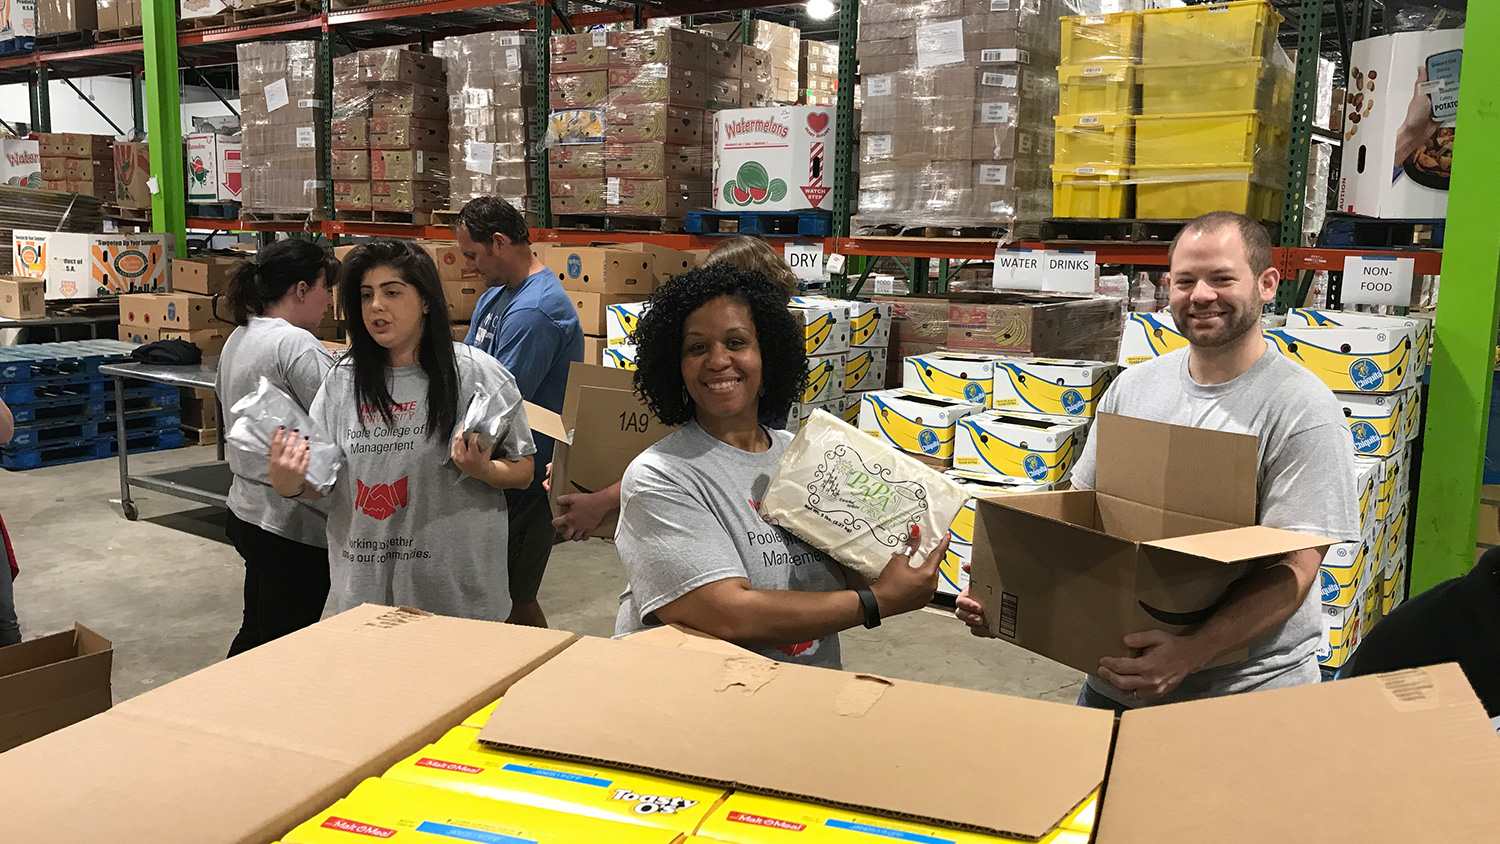 Stefani Ashkinazy, Deborah Wilkins and Brian Peters in the midst of taking food from shipping containers and packing into smaller boxes for delivery to Food Bank of Eastern and Central North Carolina clients.